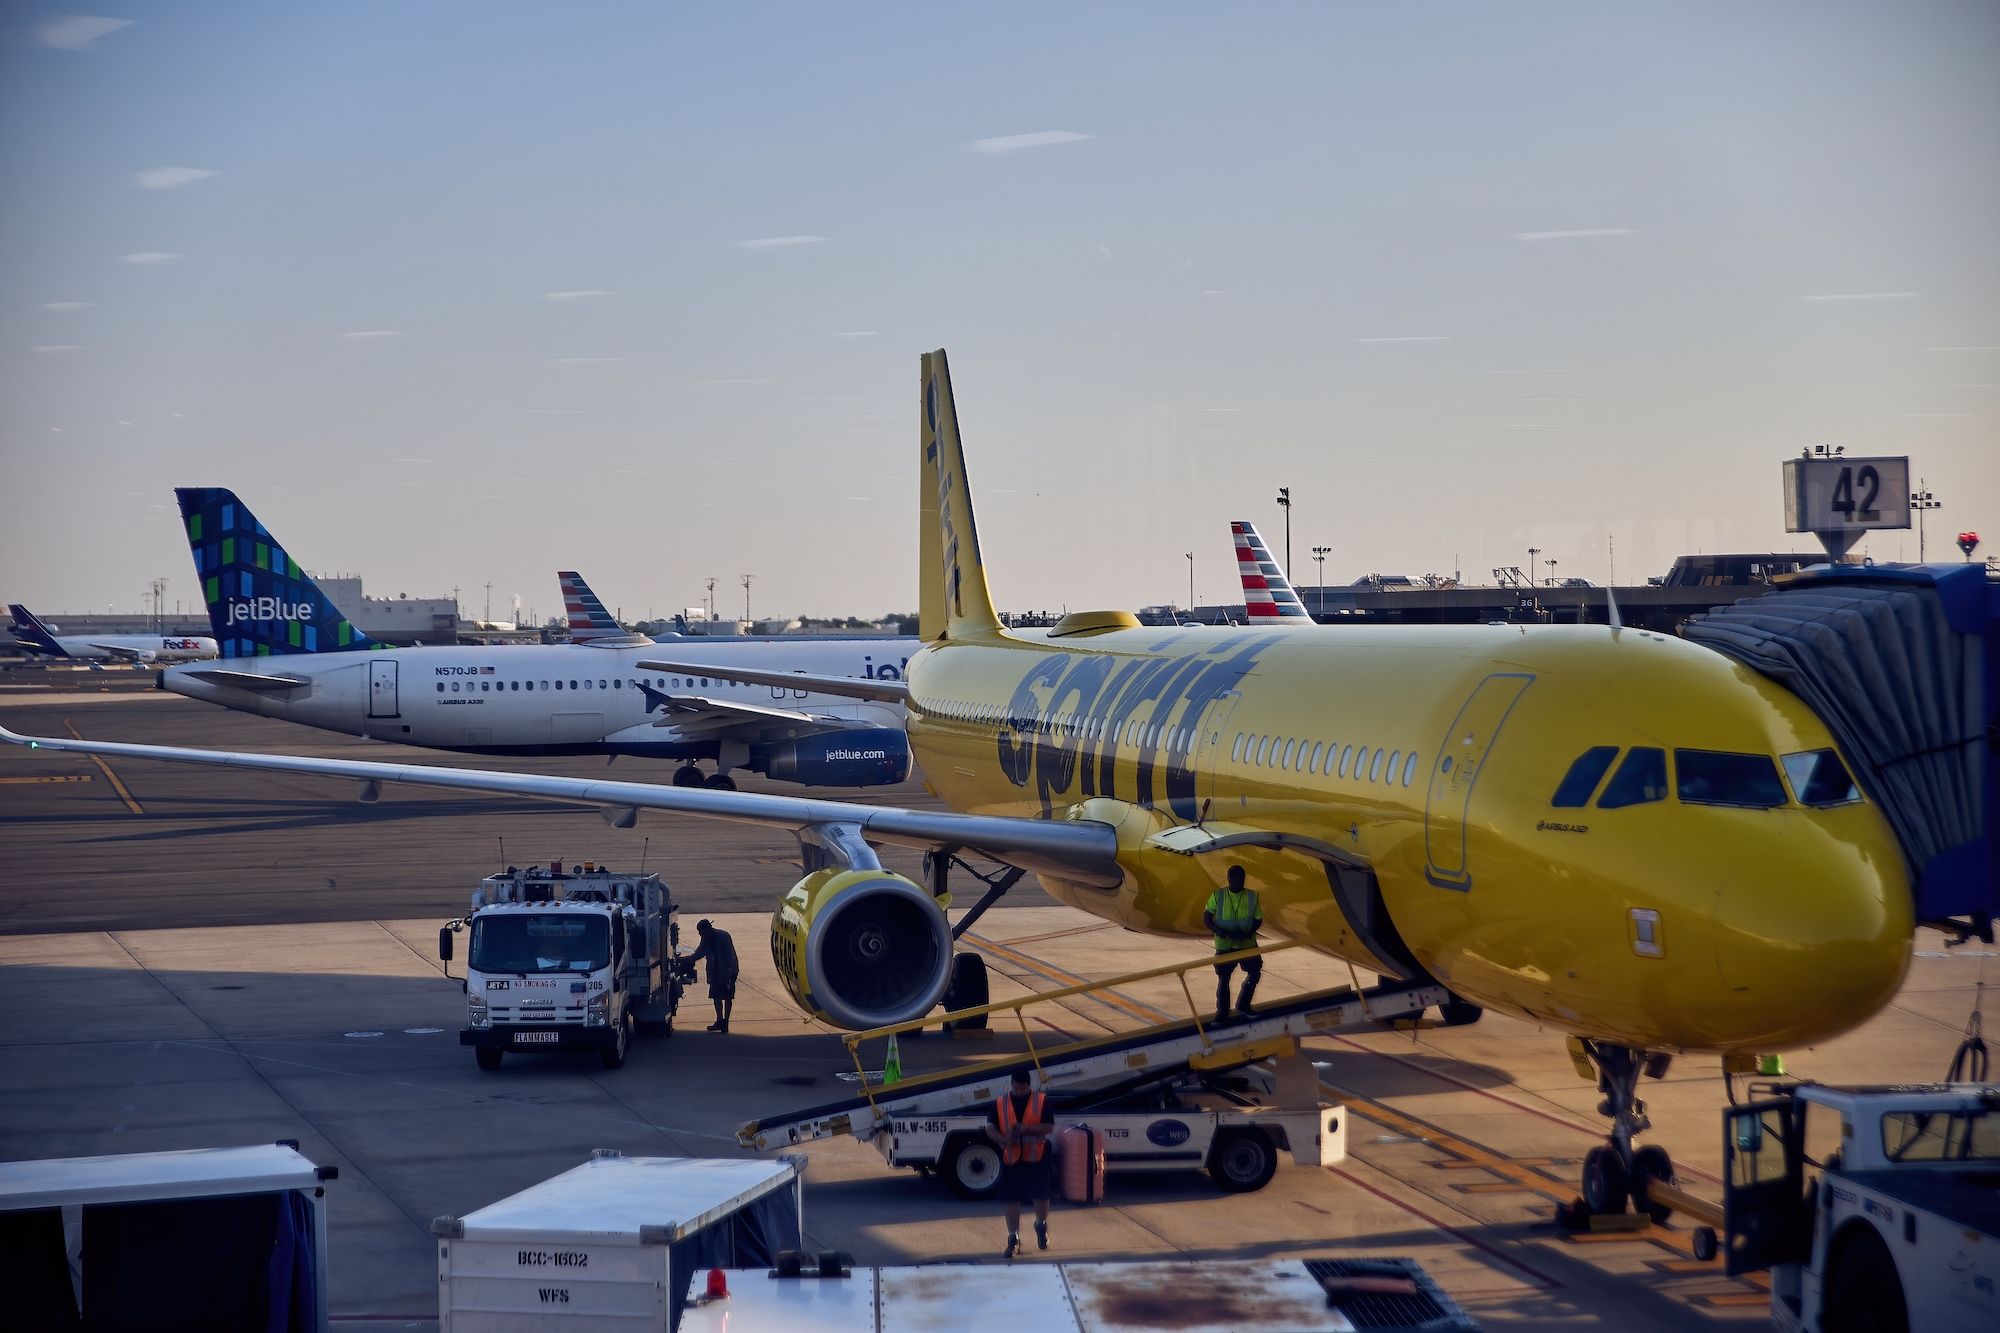 Spirit Airlines Airbus aircraft with a JetBlue jet in the background at Newark Liberty International Airport EWR